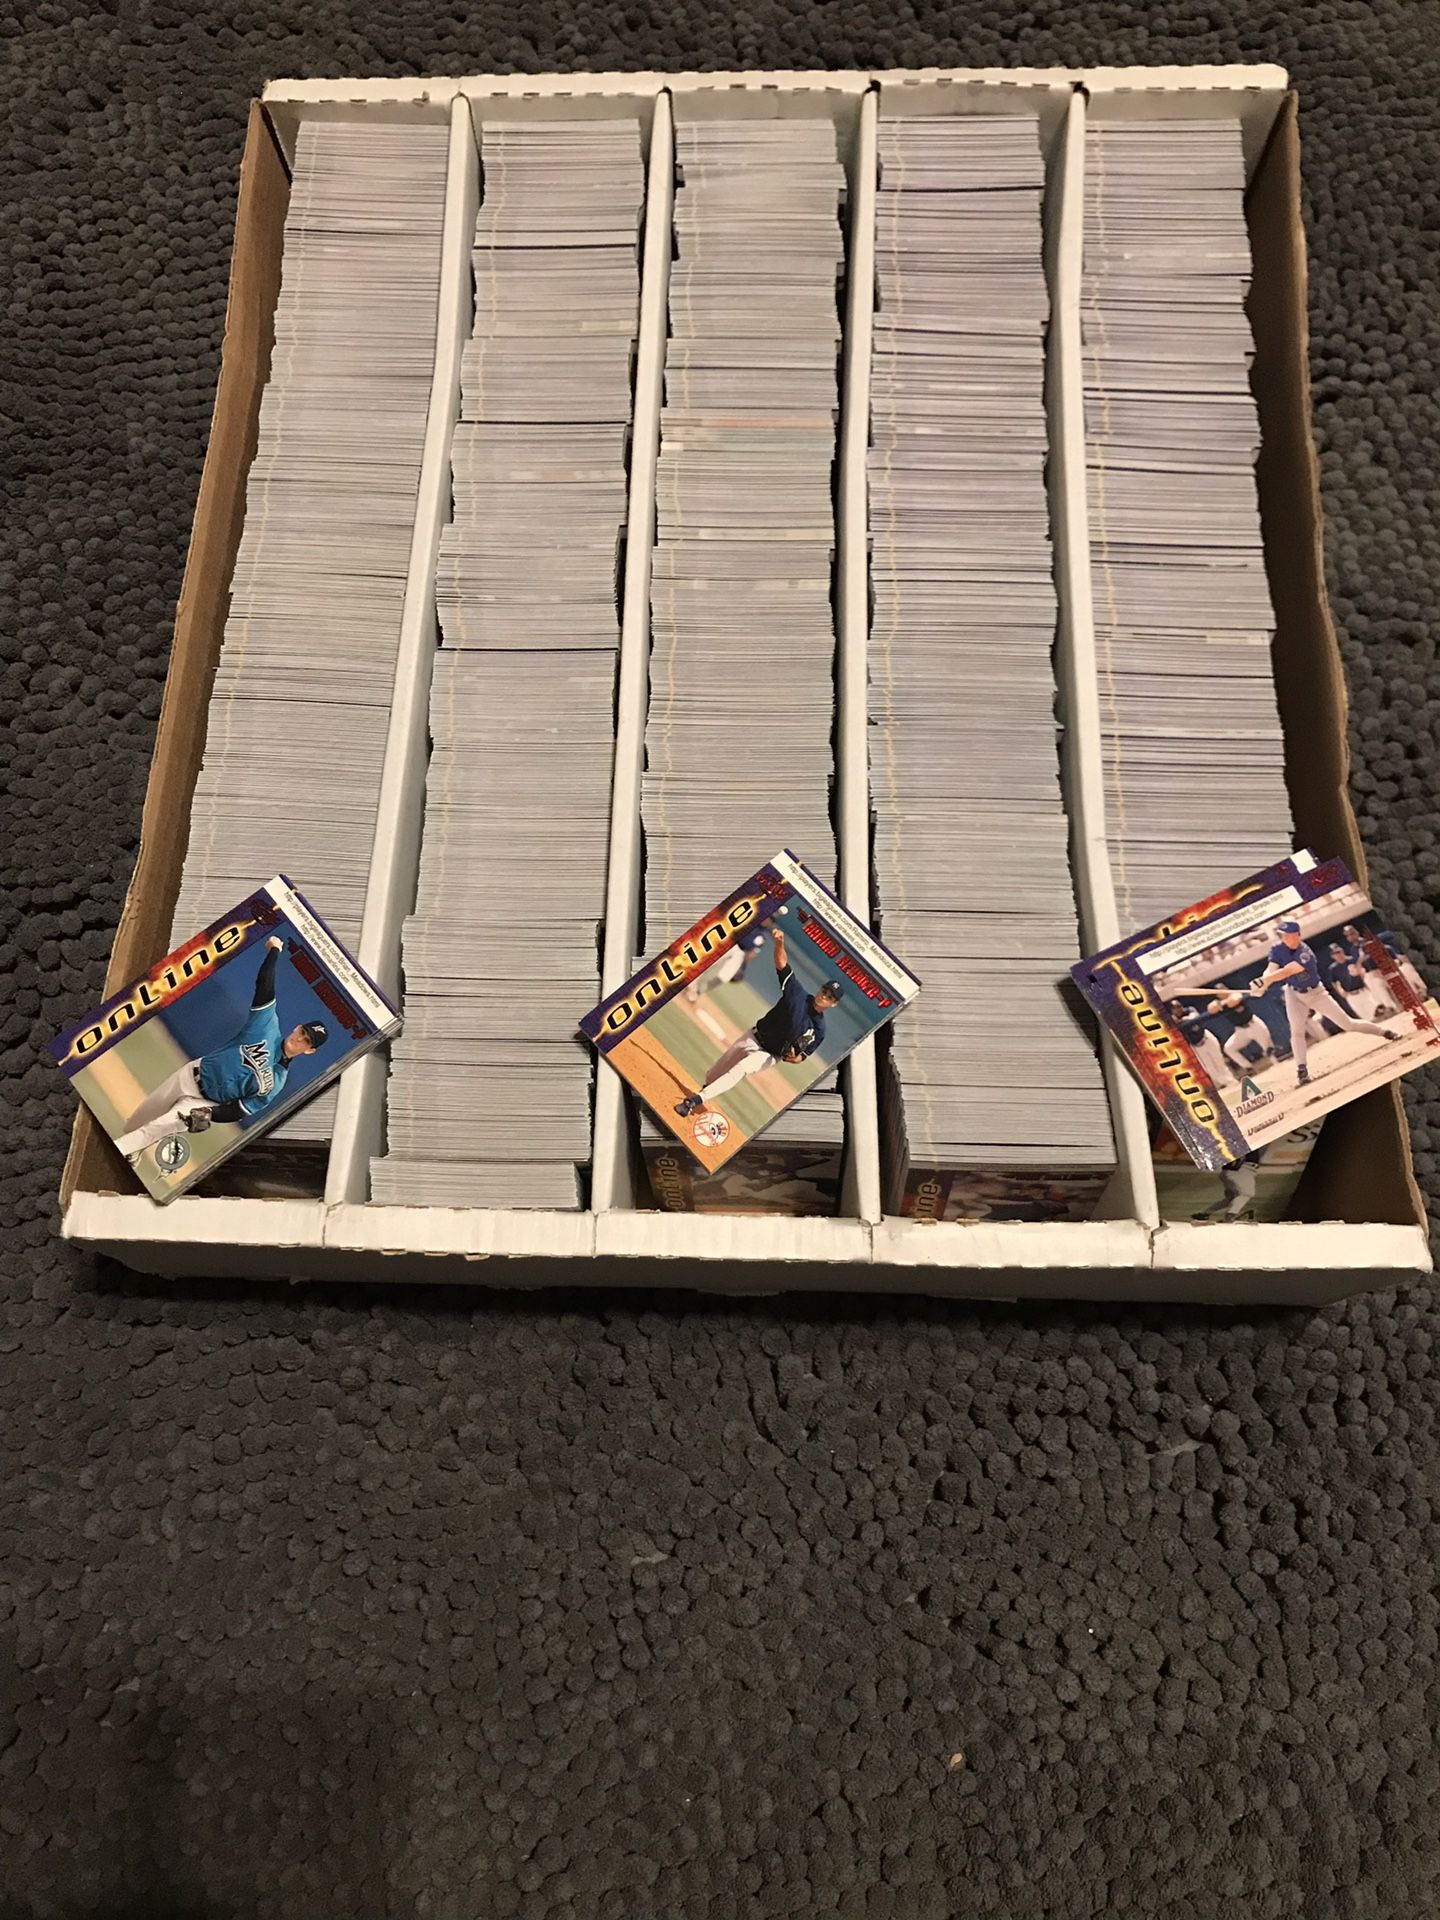 1998 Pacific Online RED baseball cards - approx 5000 cards